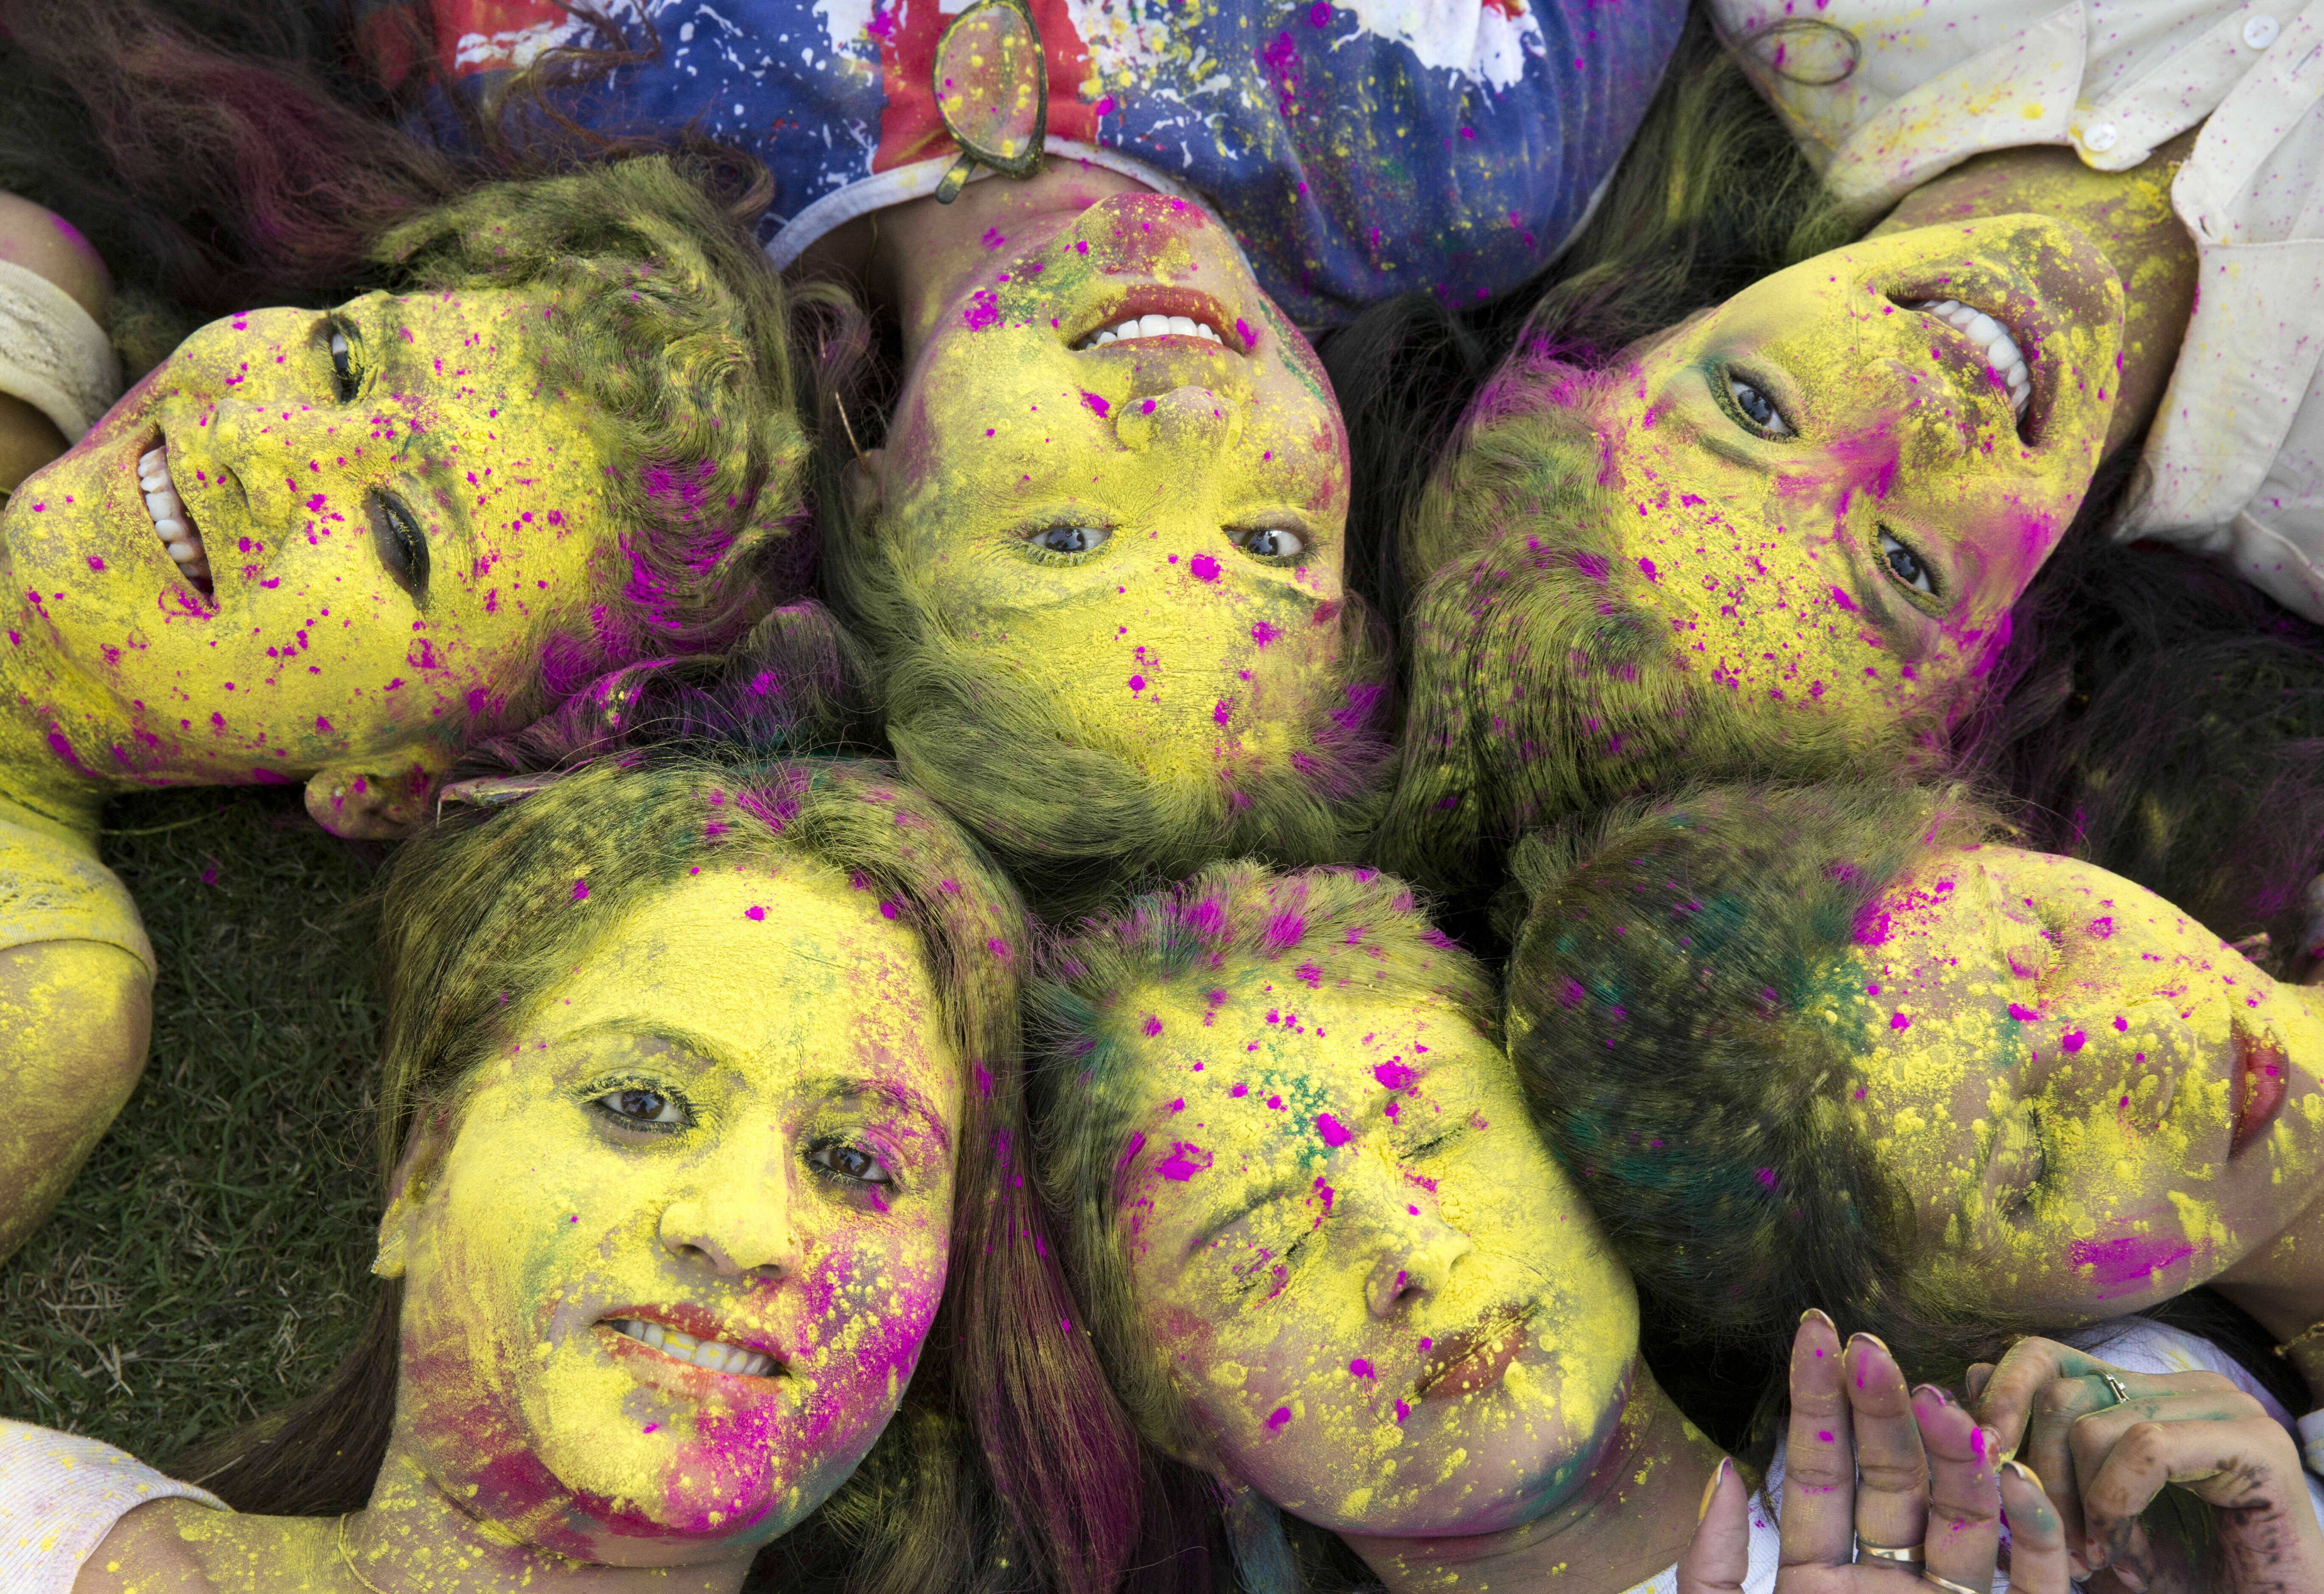 In this Wednesday, March 20, 2019 photo, Indian girls, faces smeared with color, pose for a photograph during Holi festival celebrations in Allahabad, India. The Hindu festival of colors also marks the advent of spring. (AP Photo/Rajesh Kumar Singh)